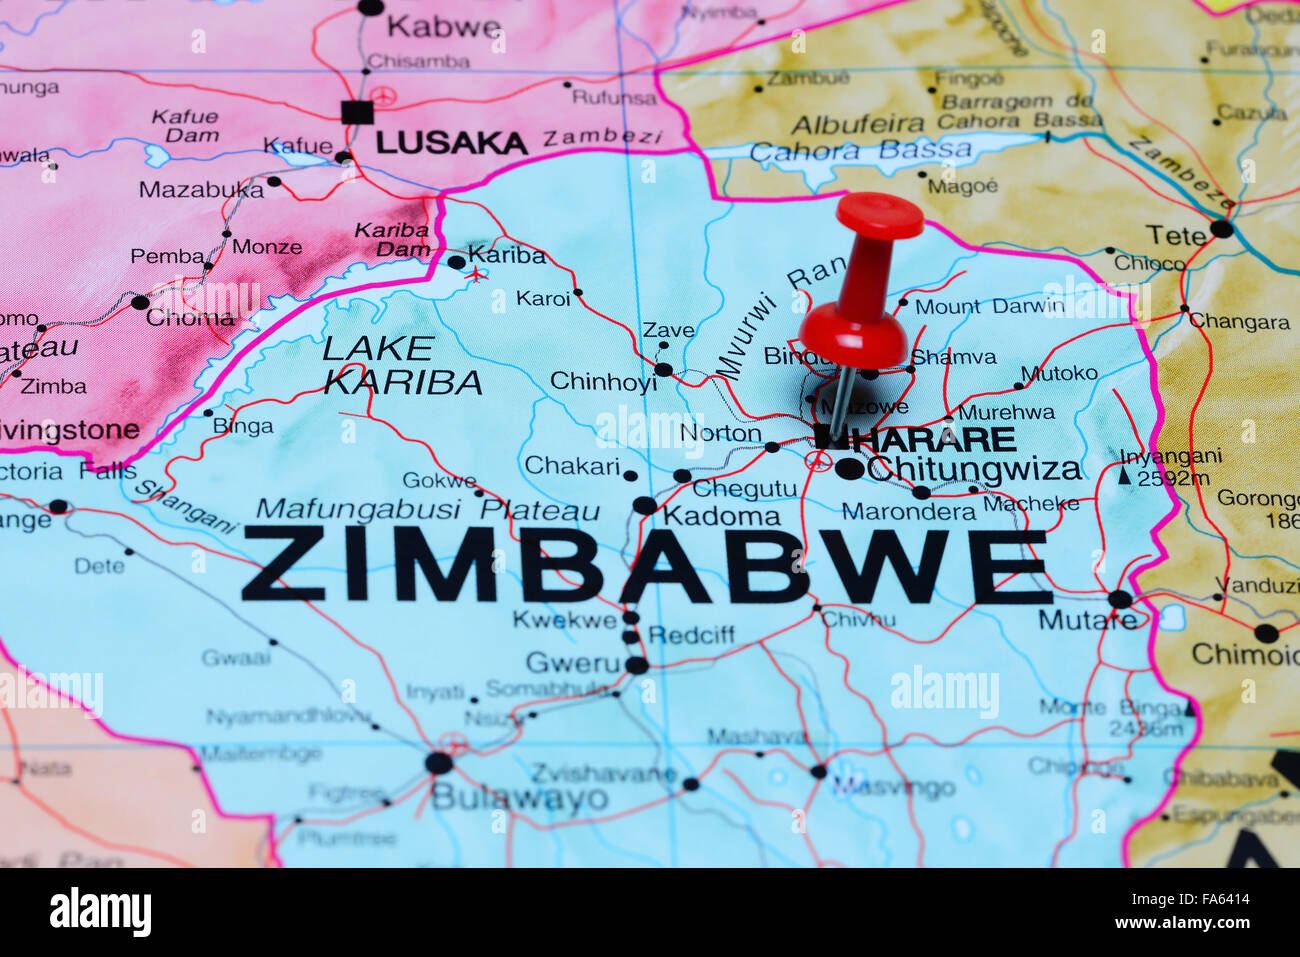 Harare pinned on a map of Africa Stock Photo